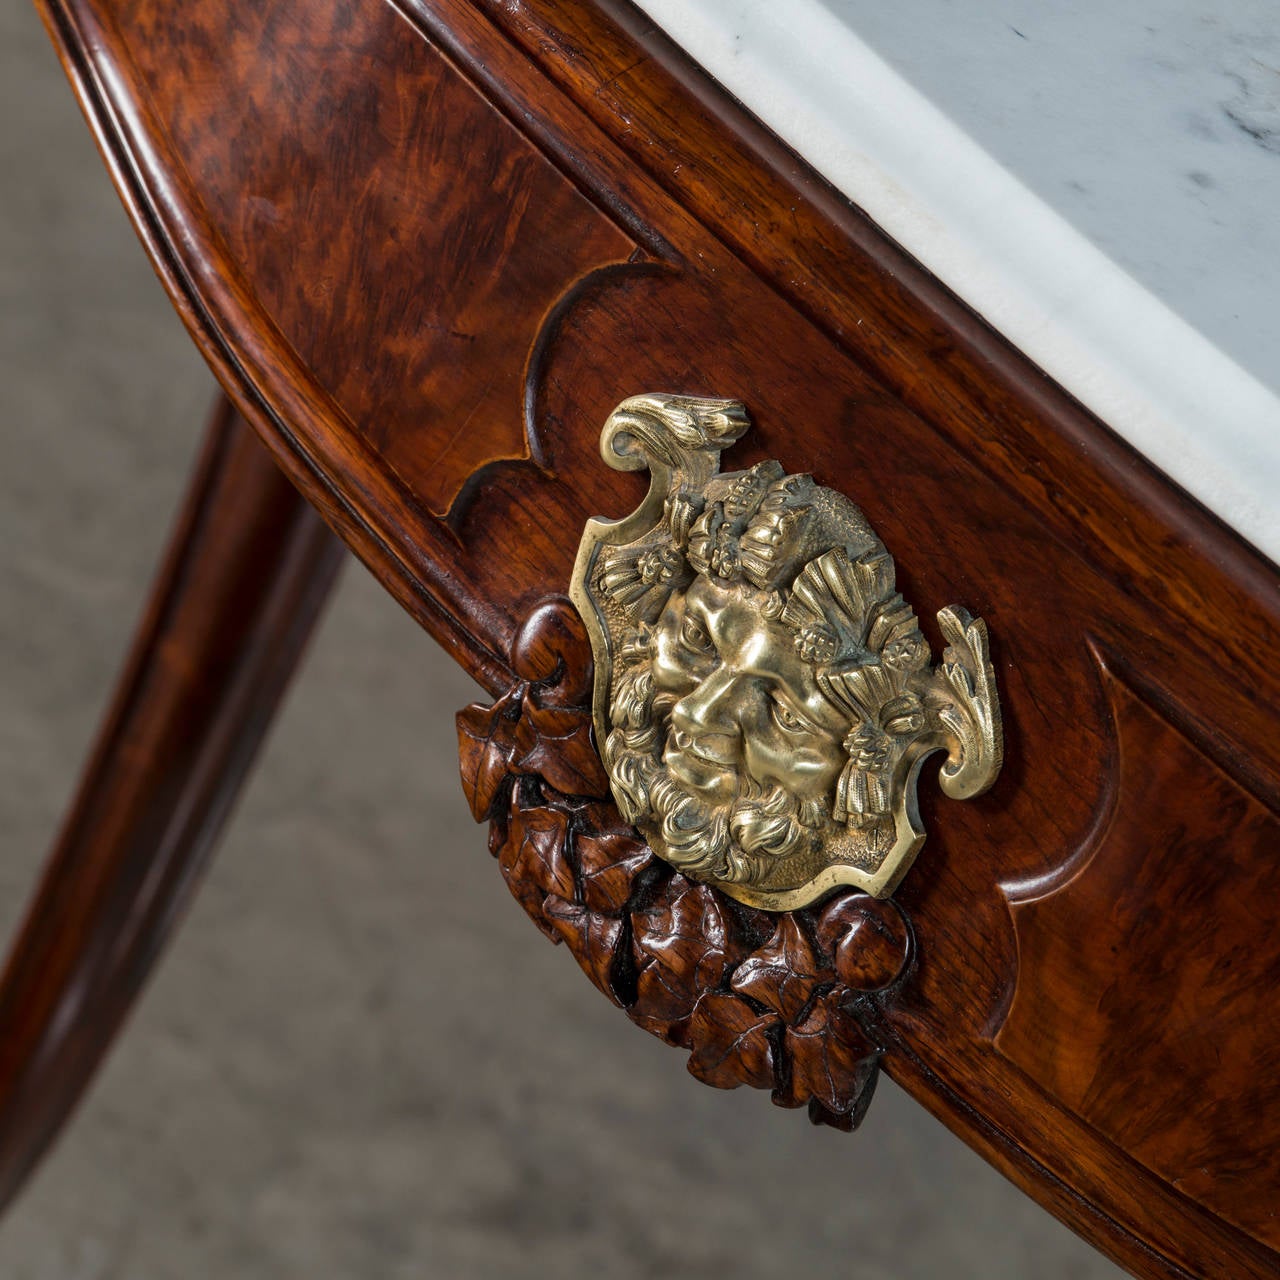 French console table in walnut. Drawer with gilt bronze in the form of a head. Cabriole legs with carving. White marble top with profiled edge, France, 1840-1860.